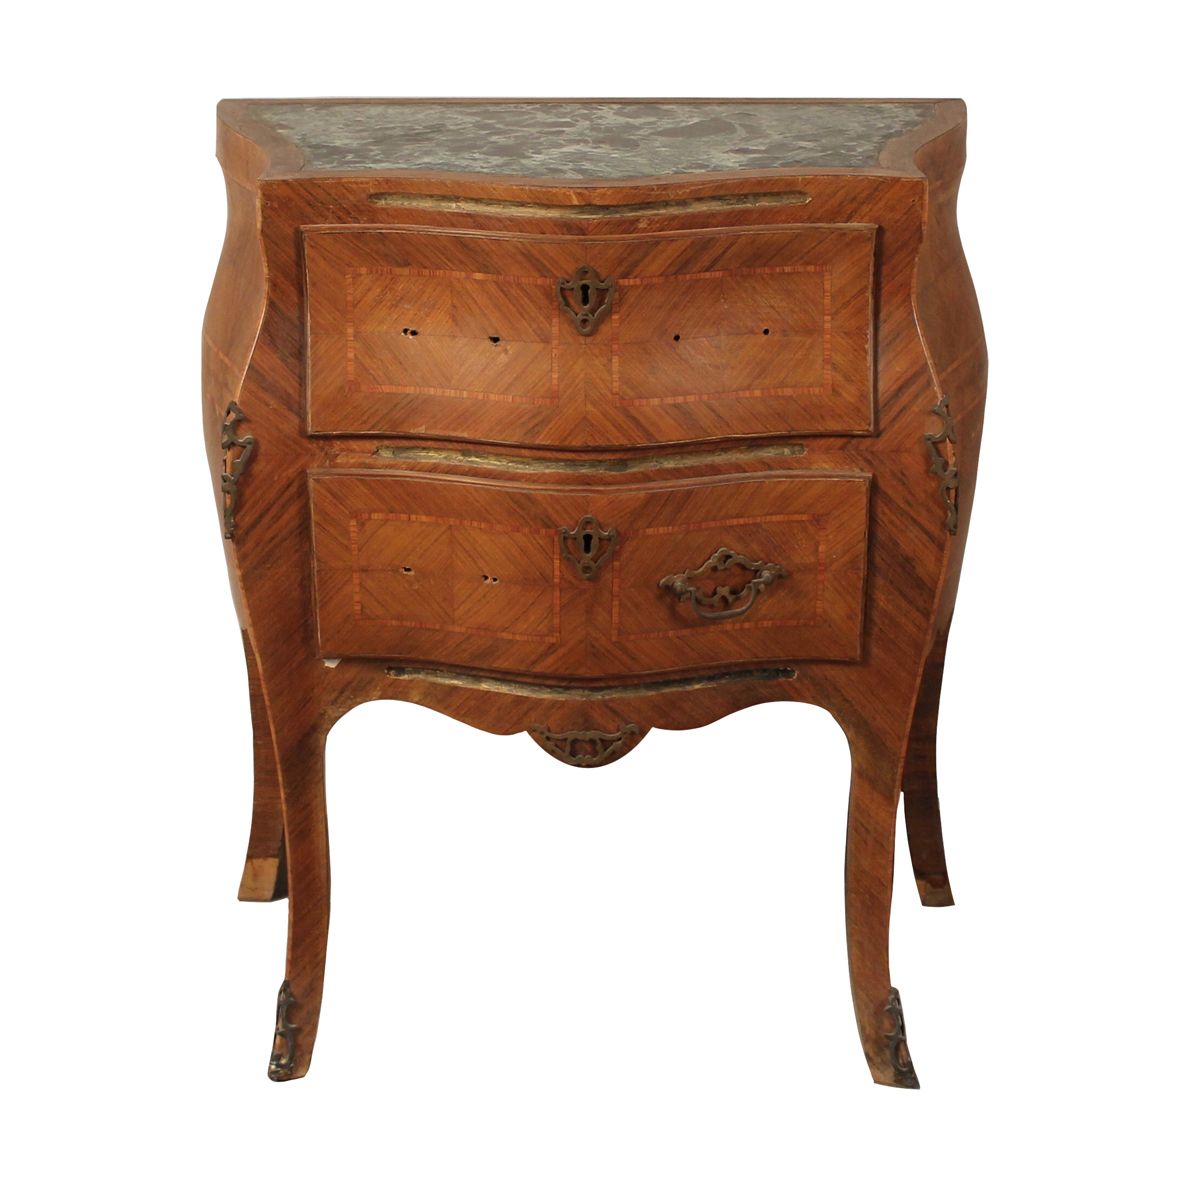 CASSETTONCINO A DUE CASSETTI - SMALL COMMODE WITH TWO DRAWERS Palo de rosa con i&hellip;